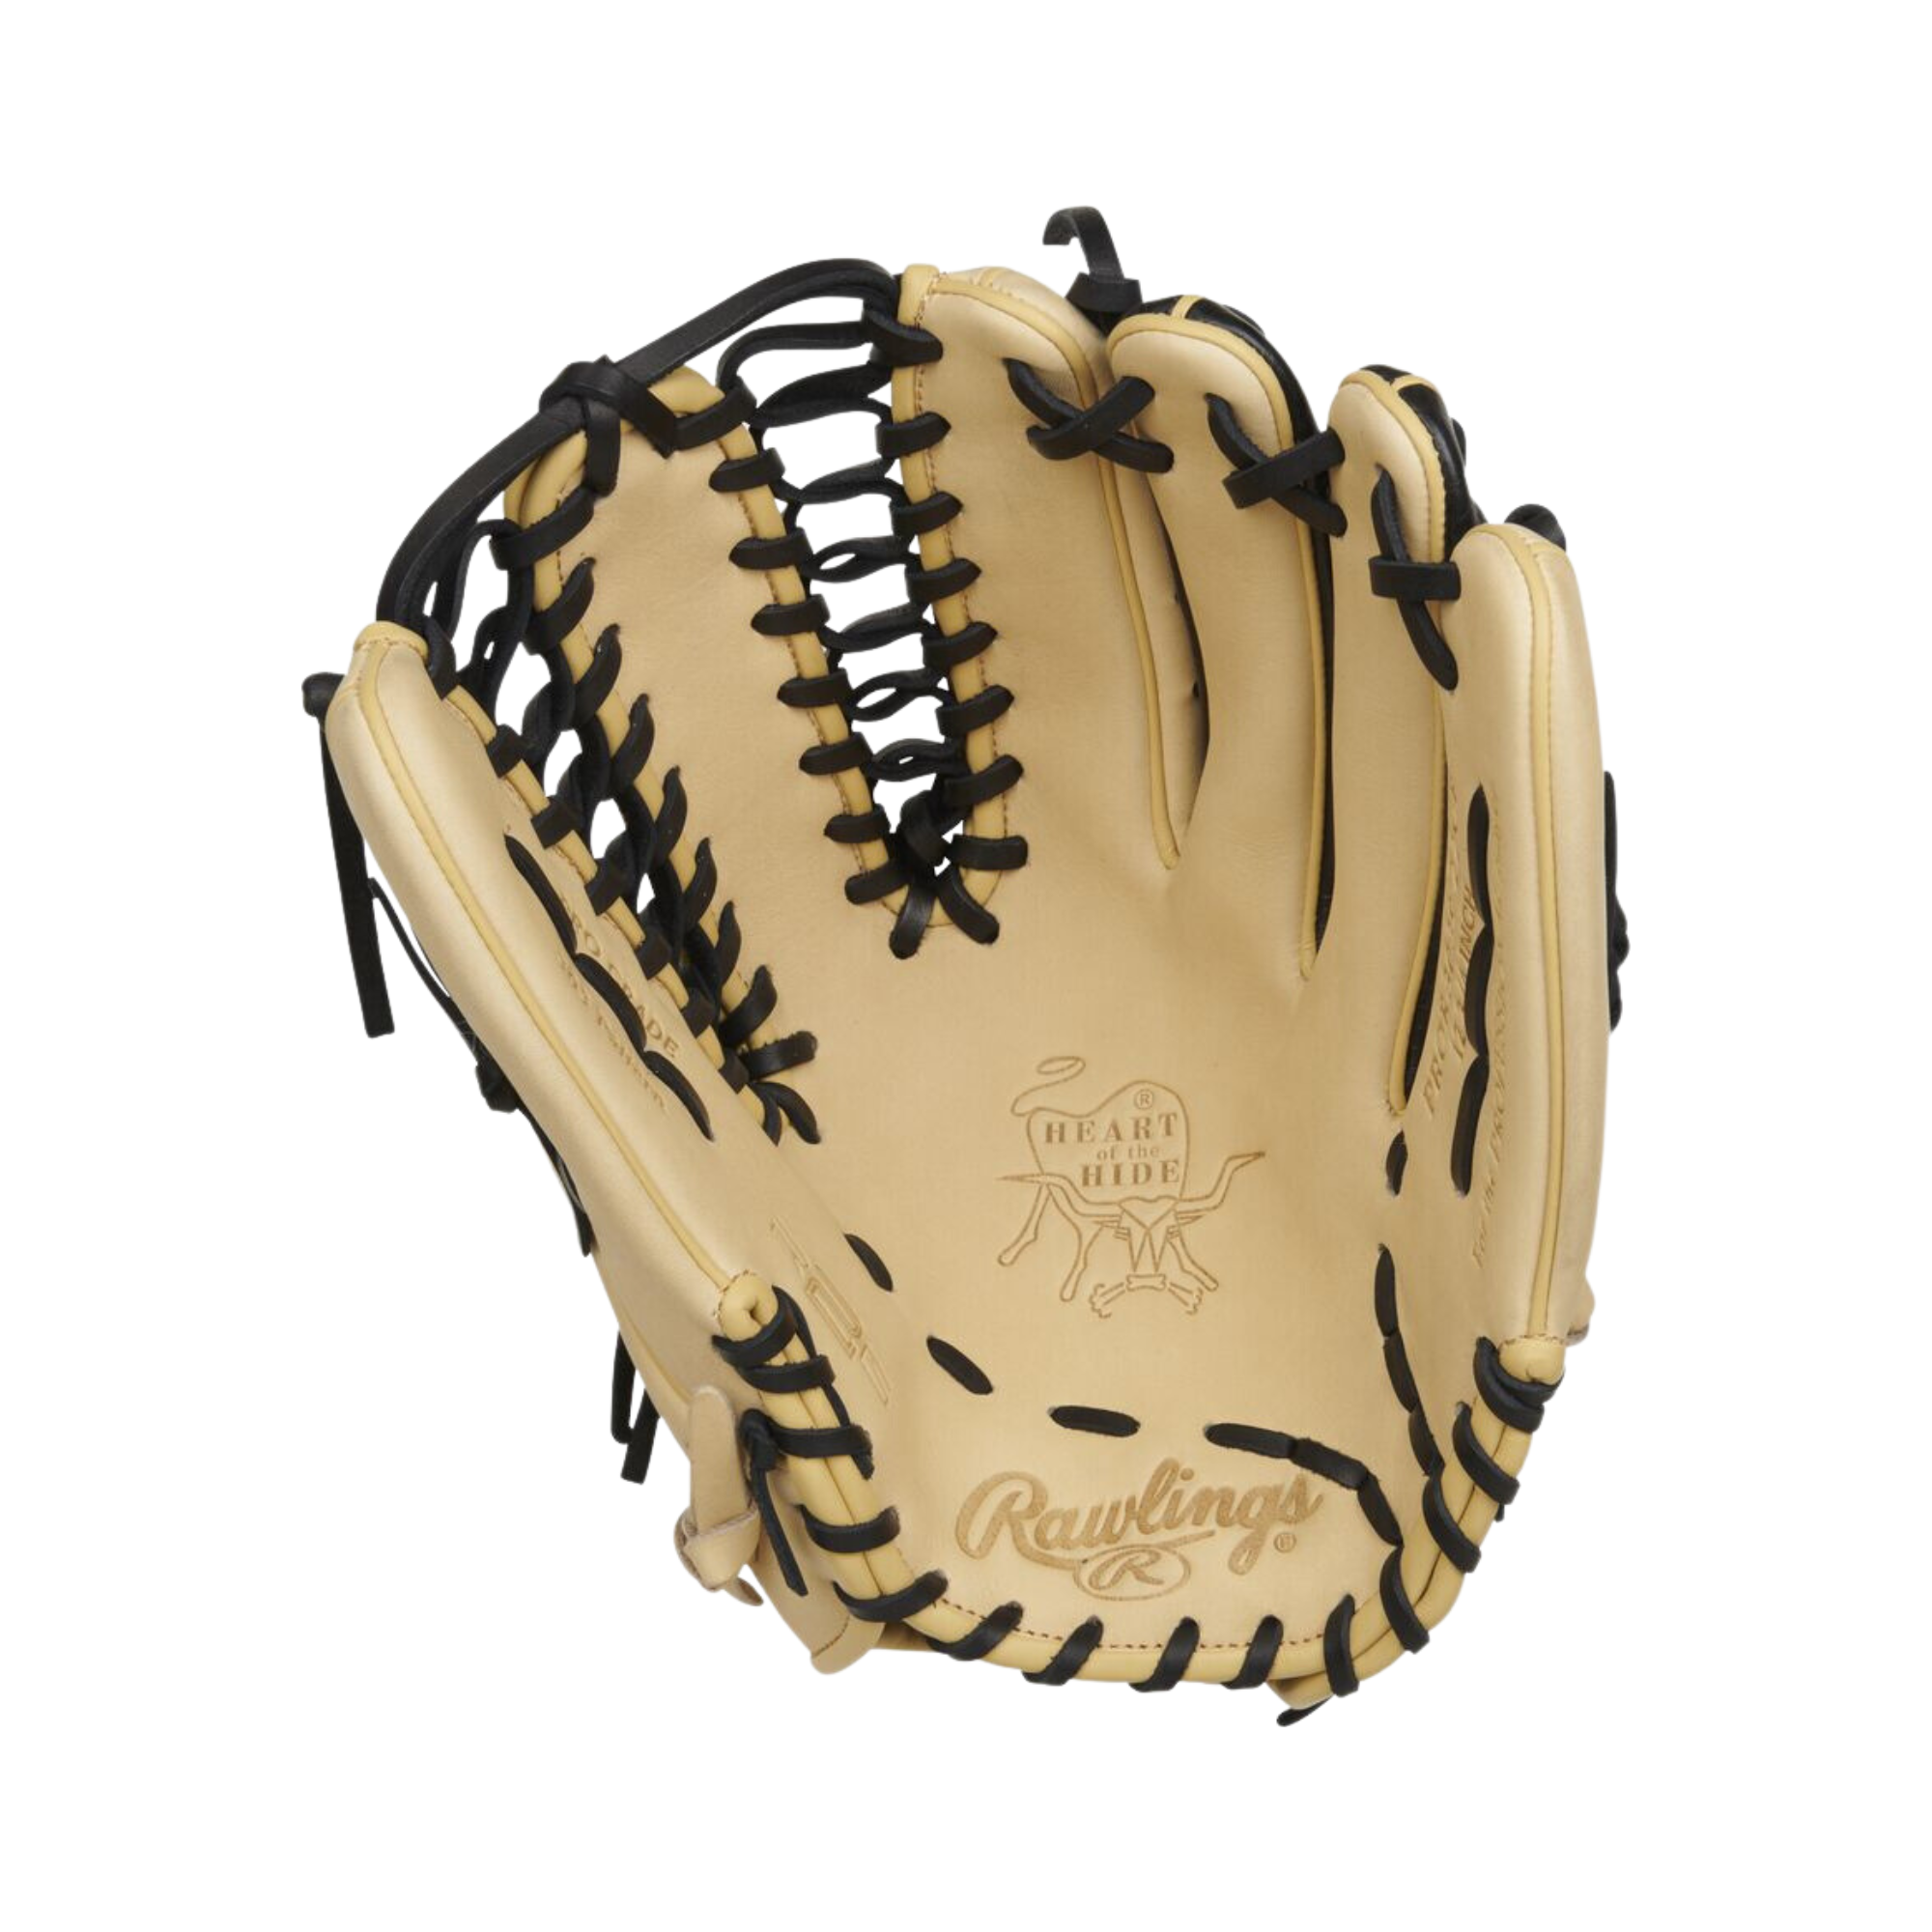 Rawlings Heart Of The Hide Trap-Eze Glove 12.75" LHT